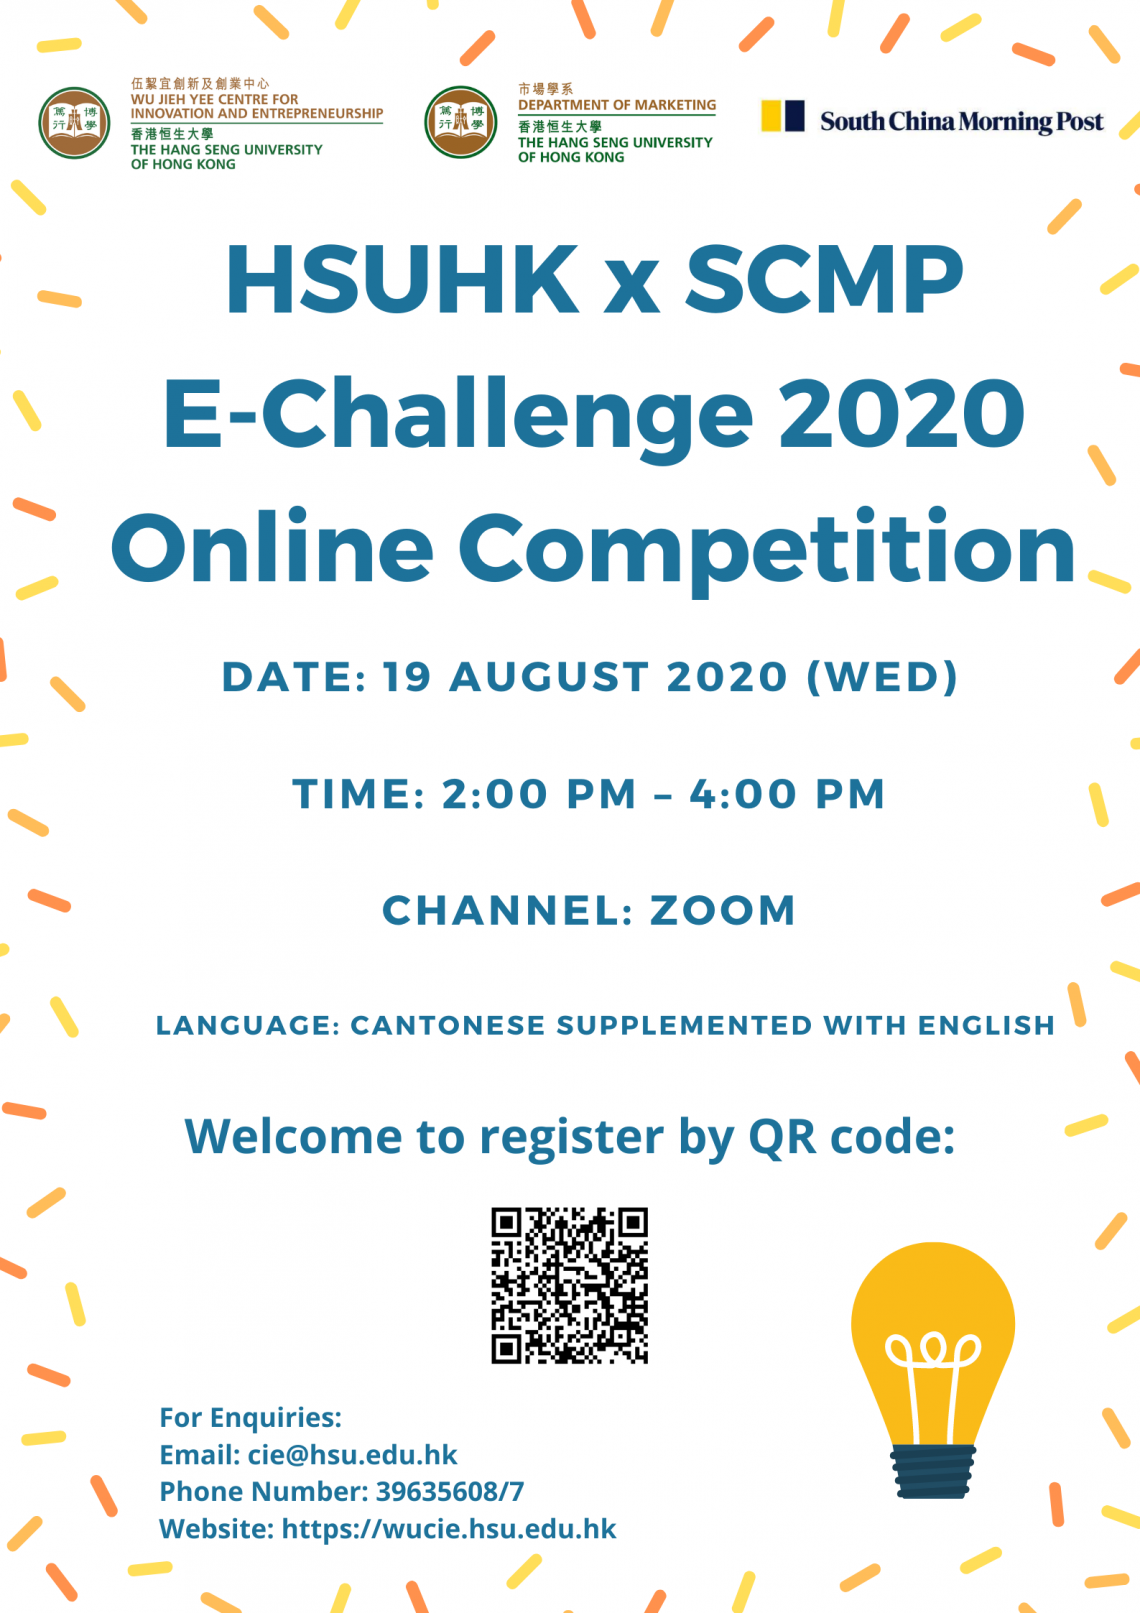 HSUHK x SCMP E-Challenge 2020 Online Competition Poster